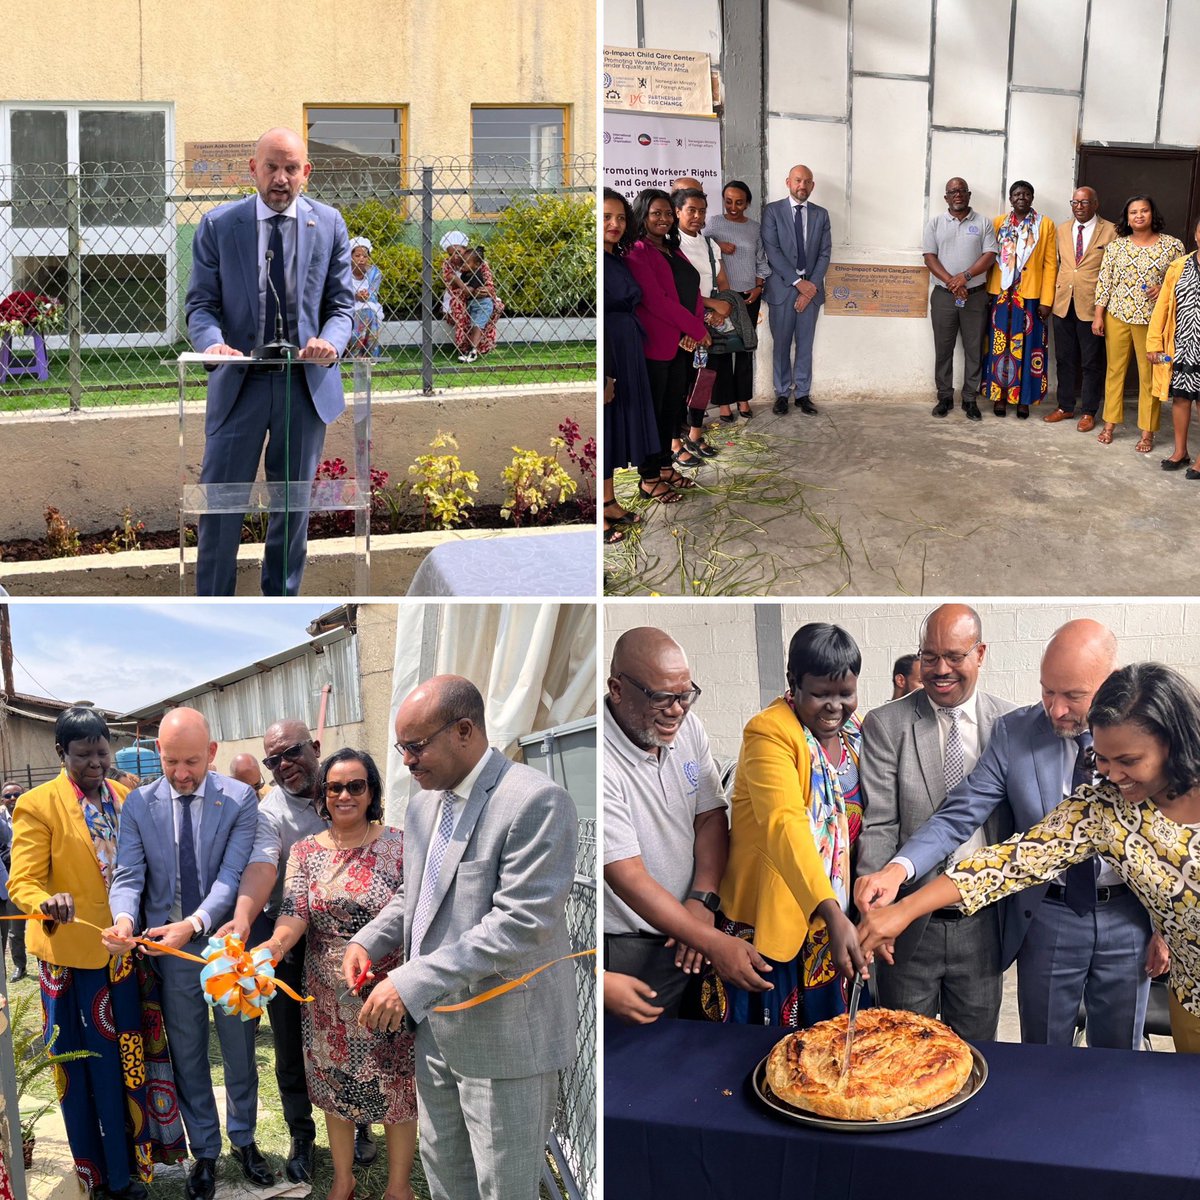 🇳🇴 proud to support @ilo @ethio_Industry and @Pf_Change realising two work place day care centres in Addis. Day care is a key step to further childrens’ needs, women’s economic empowerment, equality and economic growth in 🇪🇹. @NorwayMFA